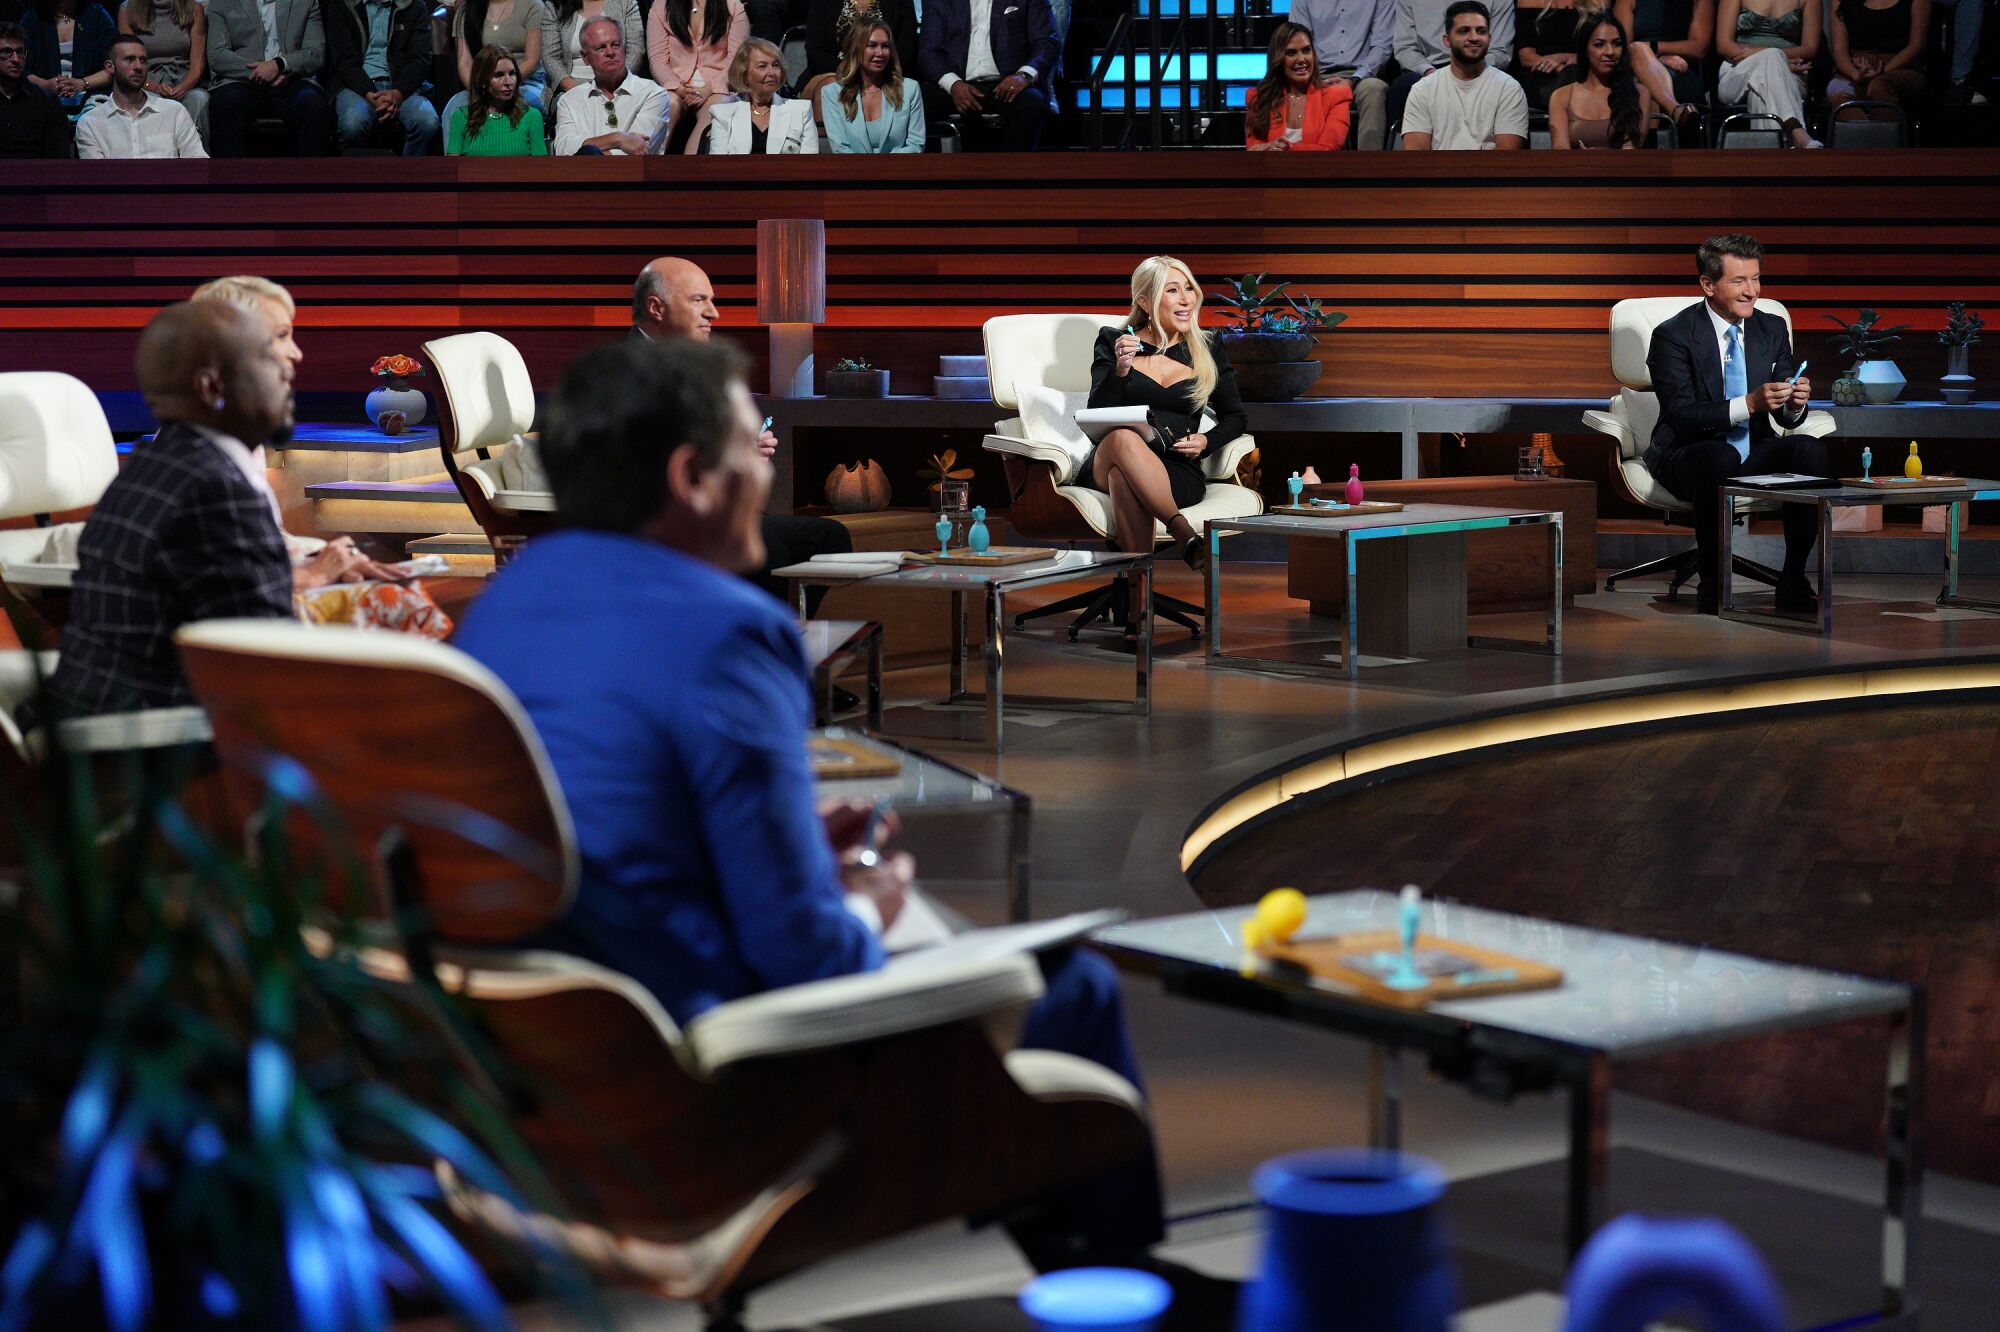 "Shark Tank" celebrity panelists sit at a curved dais during taping as a studio audience looks on